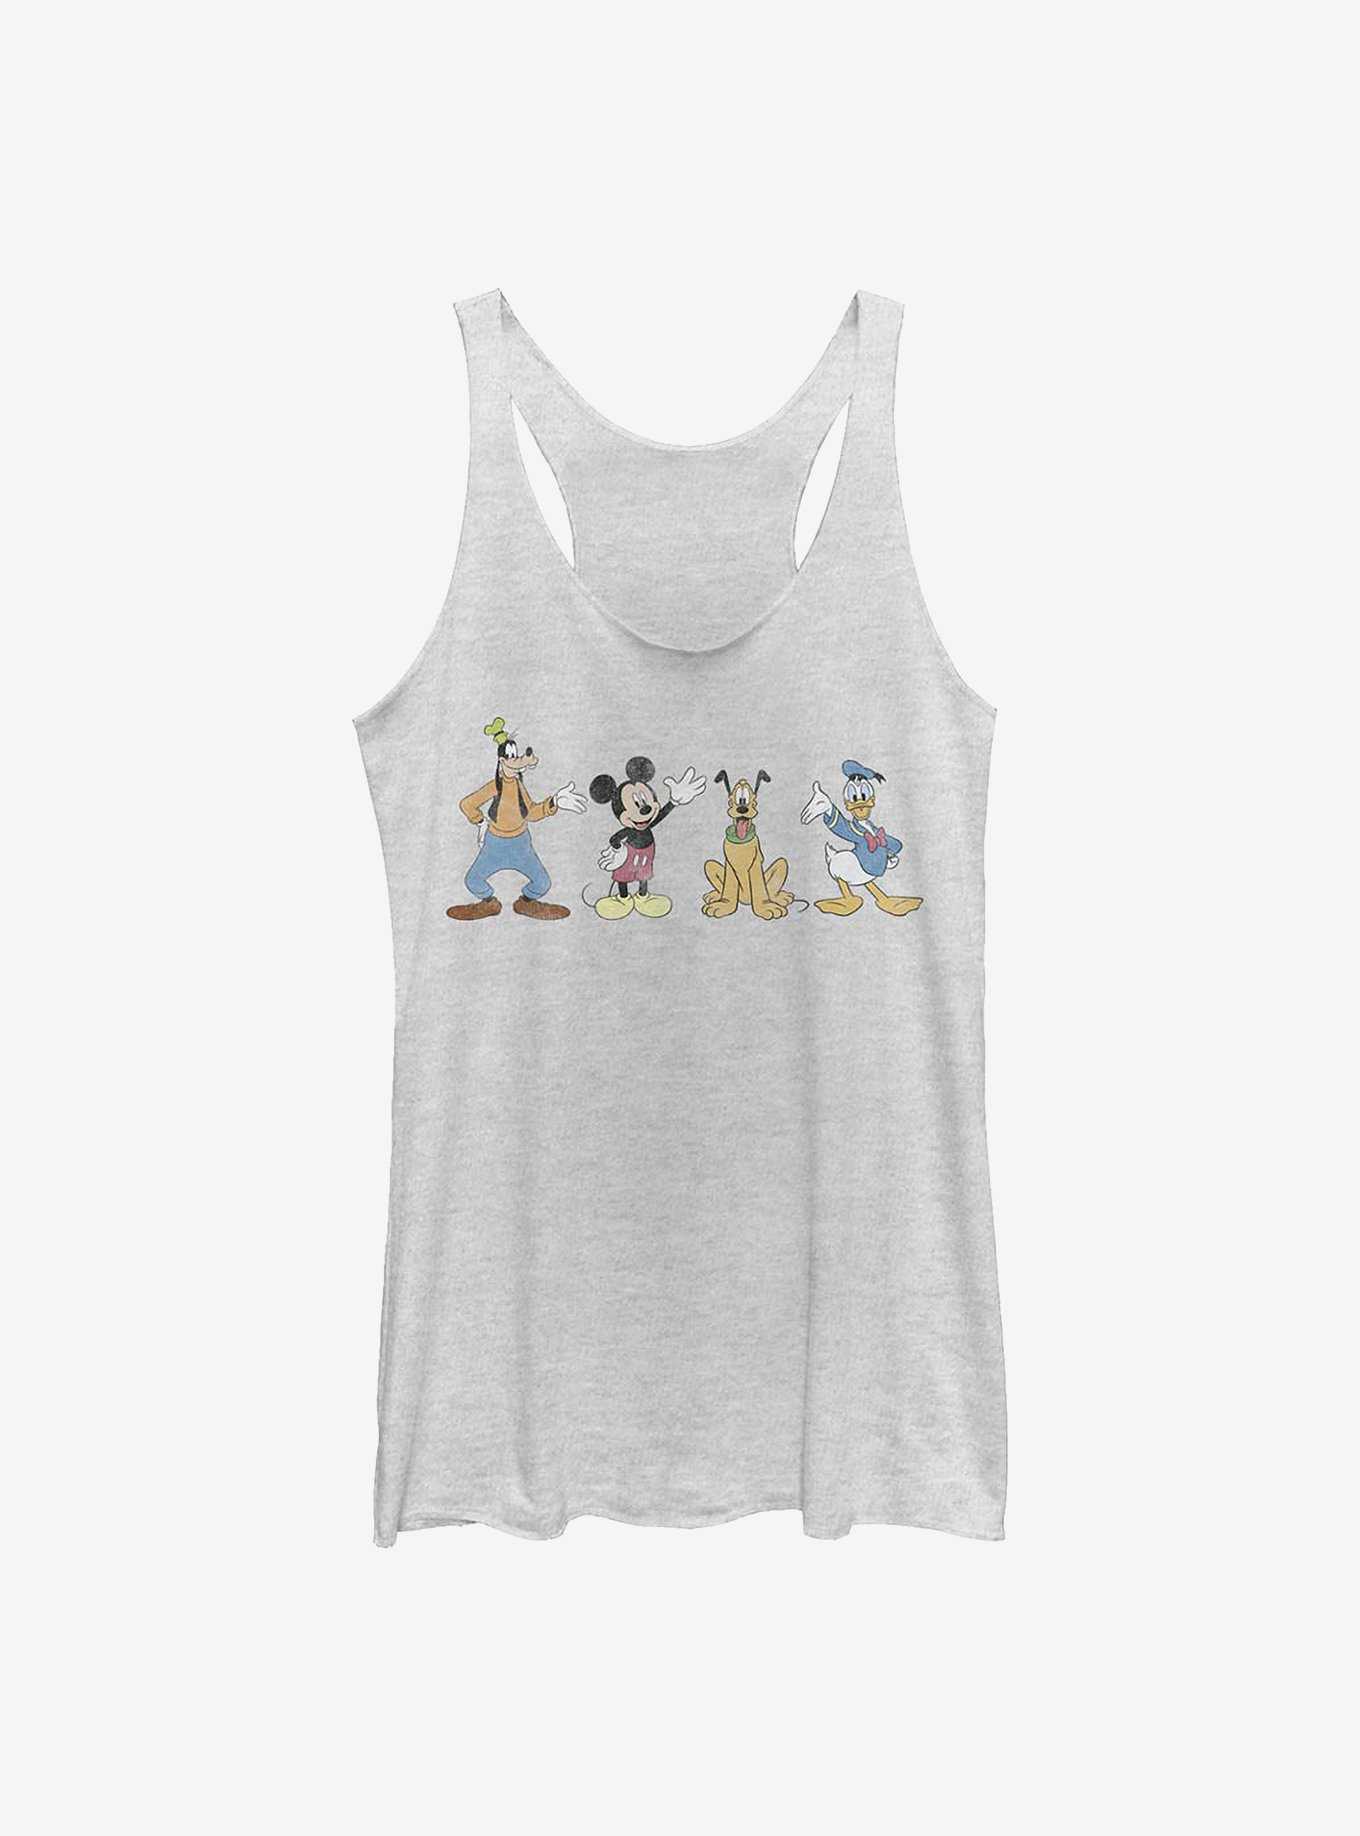 Funny Disney Tank Tops for Sale